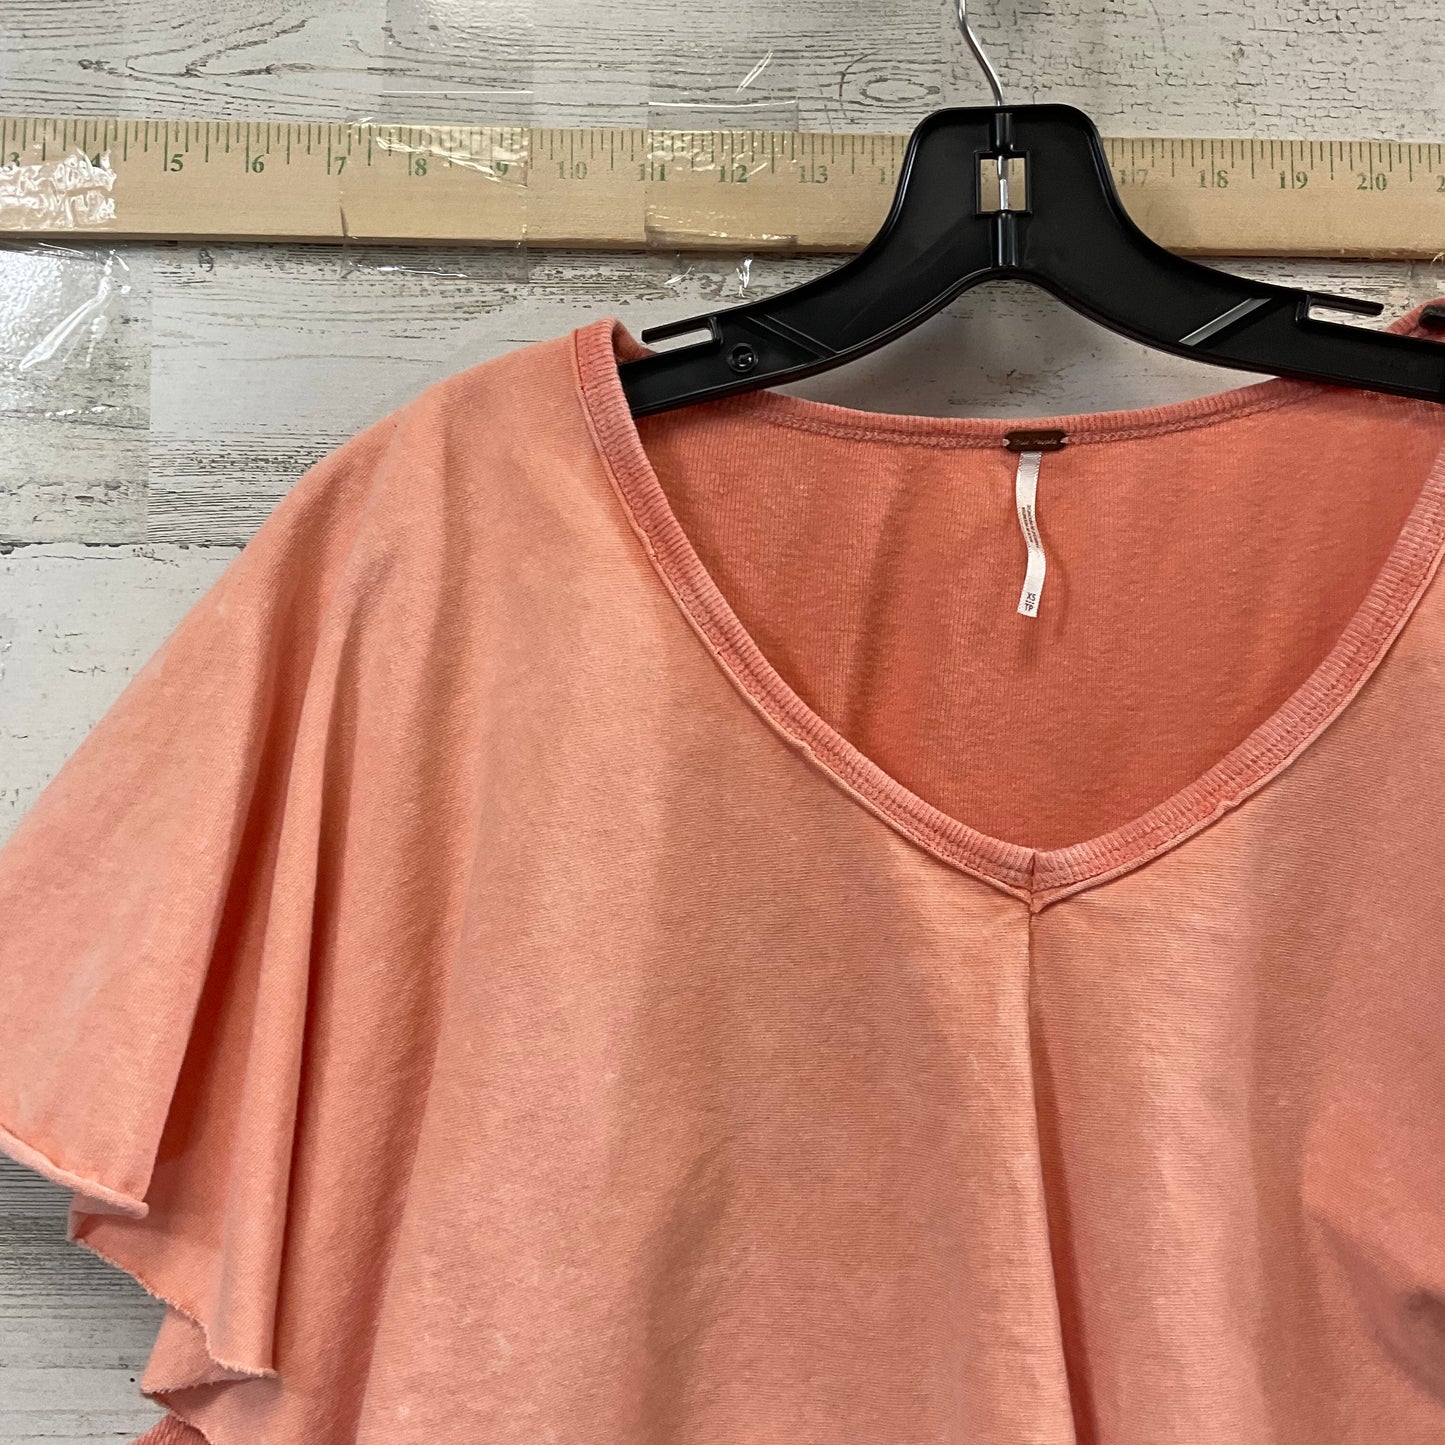 Peach Top Short Sleeve Free People, Size Xs